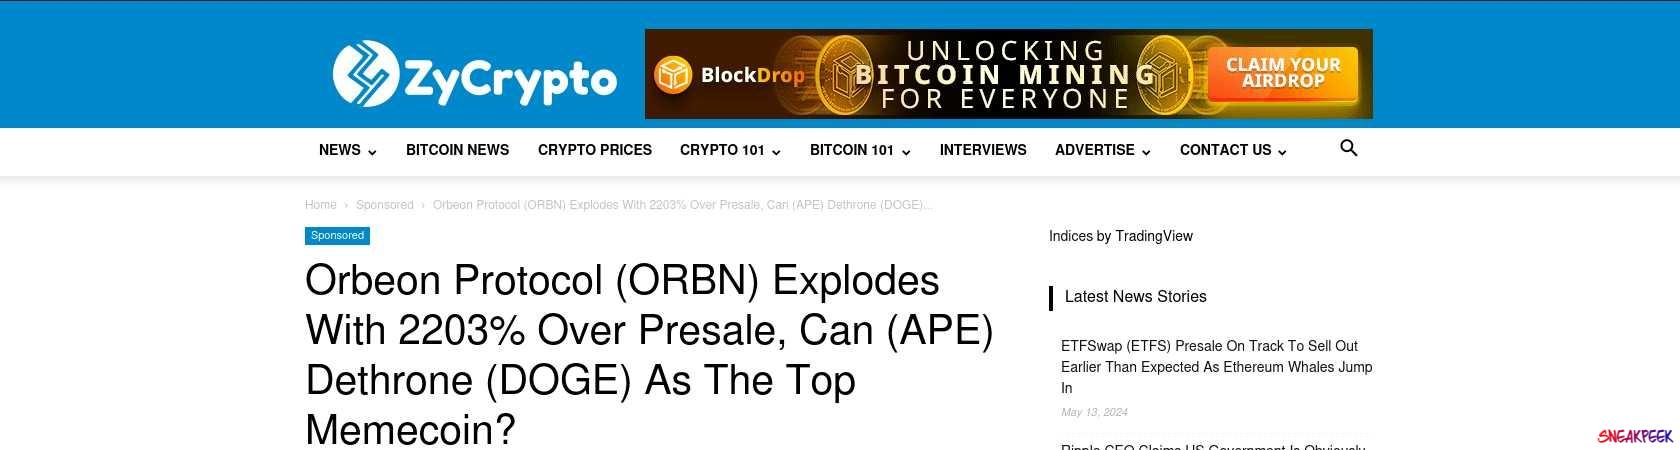 Read the full Article:  ⭲ Orbeon Protocol (ORBN) Explodes With 2203% Over Presale, Can (APE) Dethrone (DOGE) As The Top Memecoin?